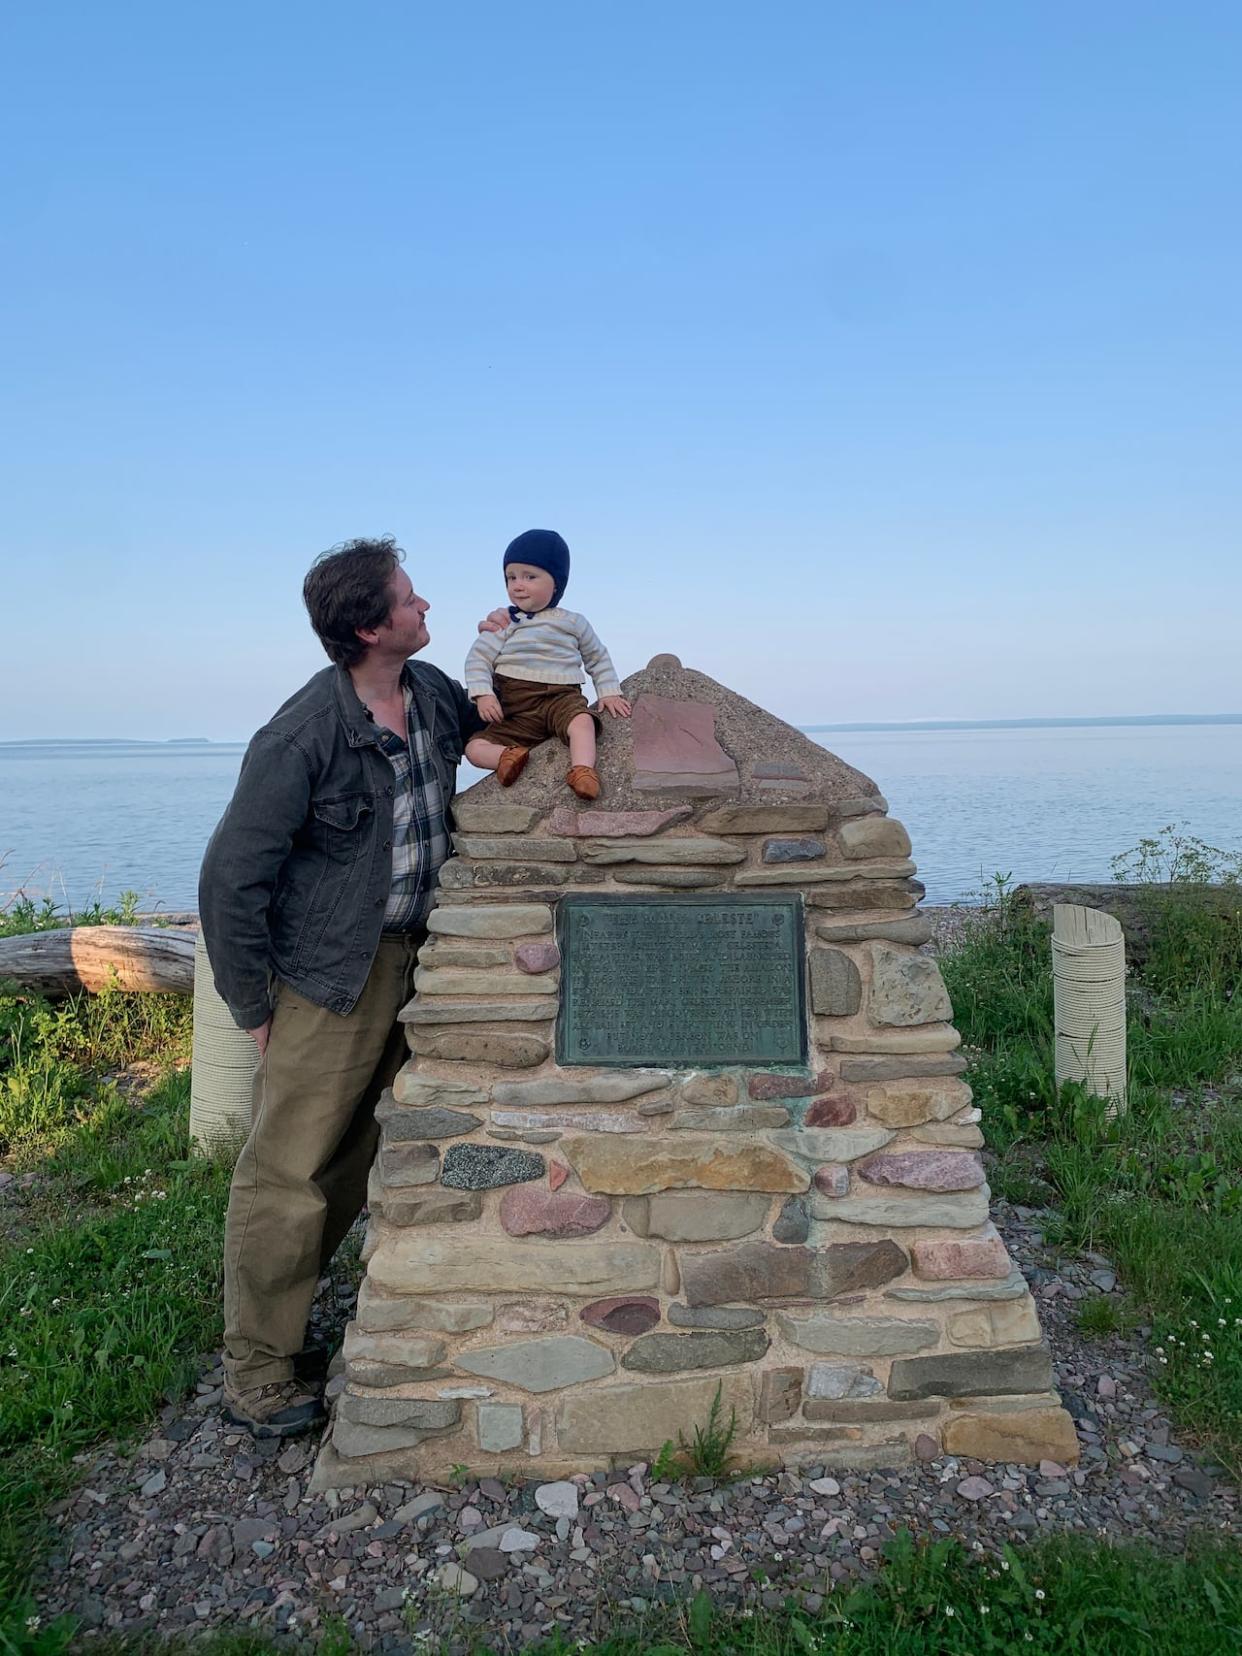 Tom Lynskey and son at the memorial marker for the Amazon/Mary Celeste in Spencer's Island, N.S. (Emma Lynskey - image credit)